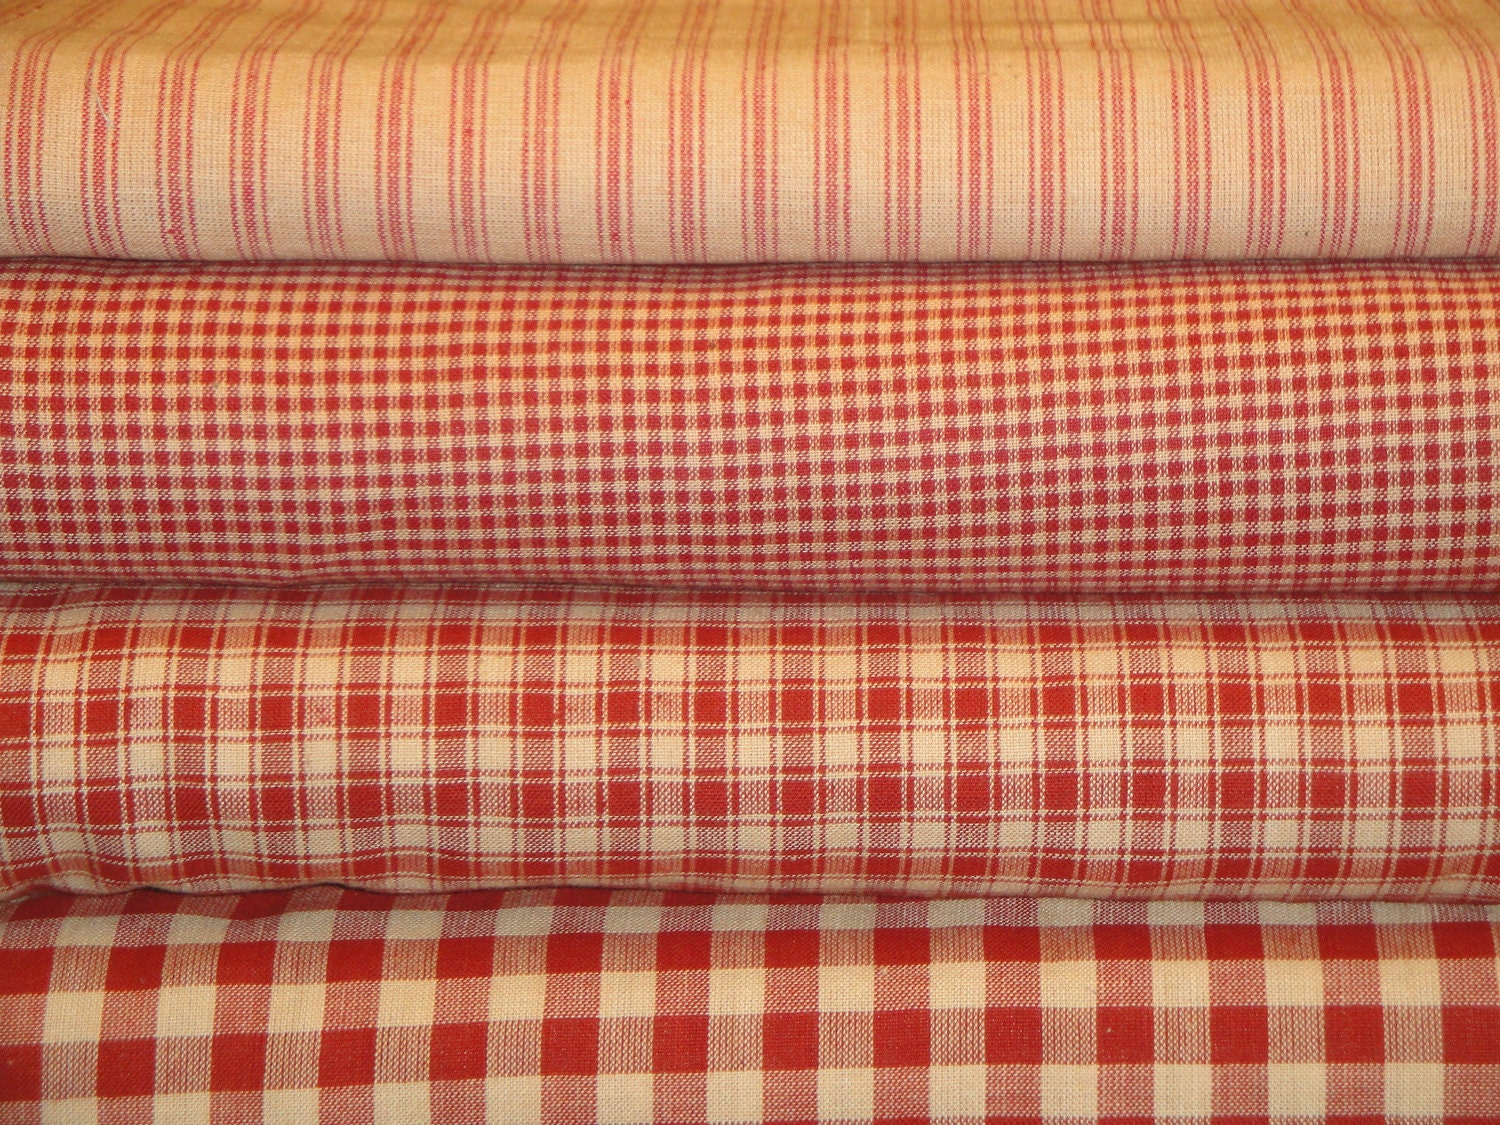 Red and Natural Tan Small Check Fabric Primitive Red Check